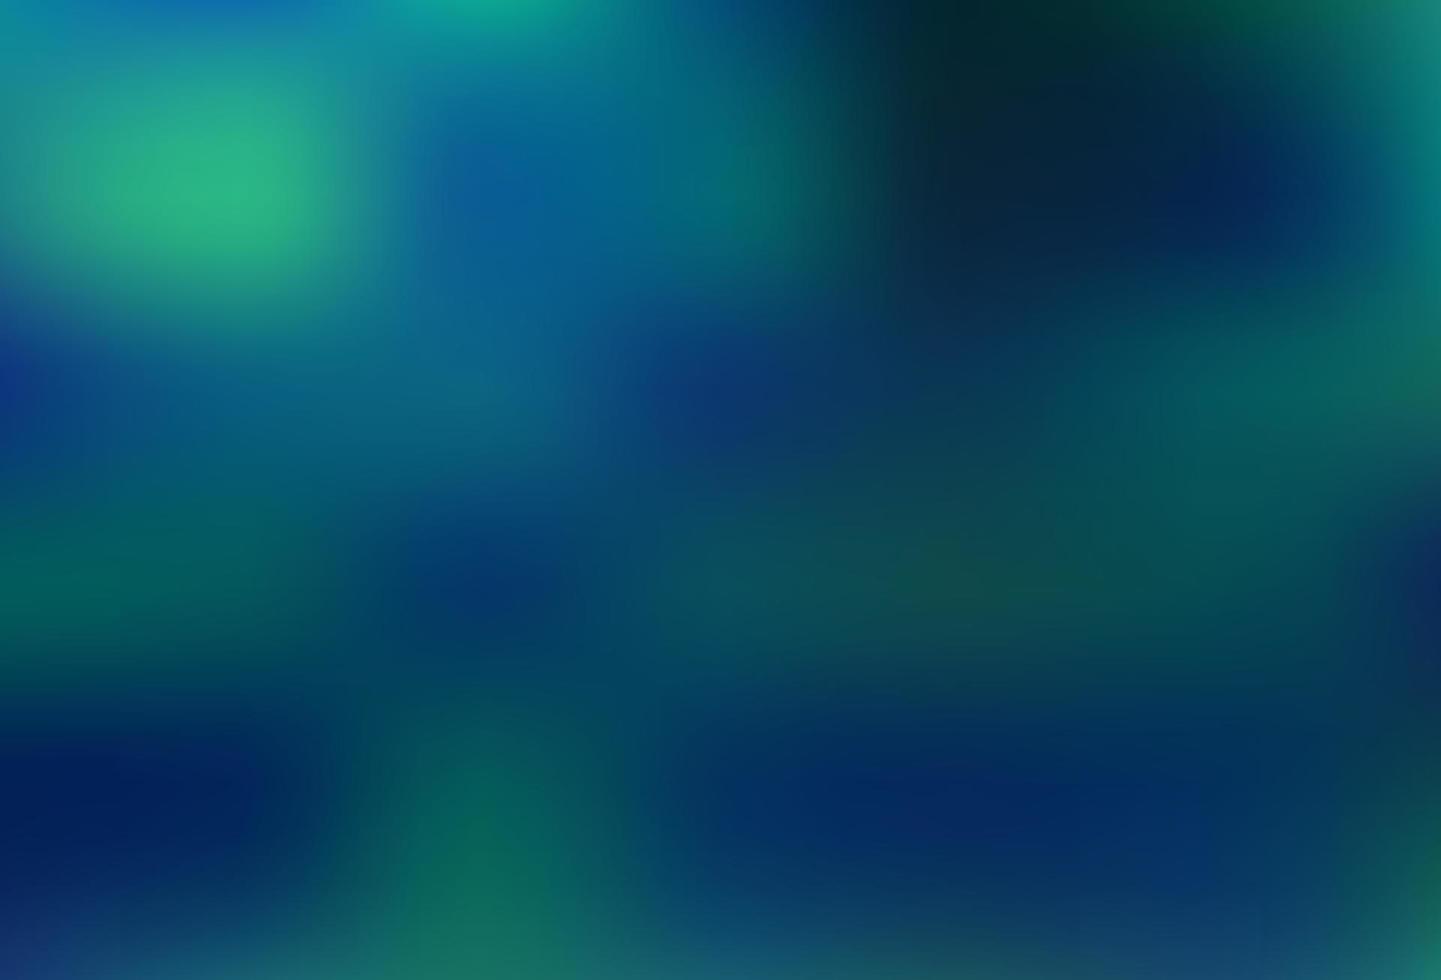 Light BLUE vector blurred shine abstract pattern.